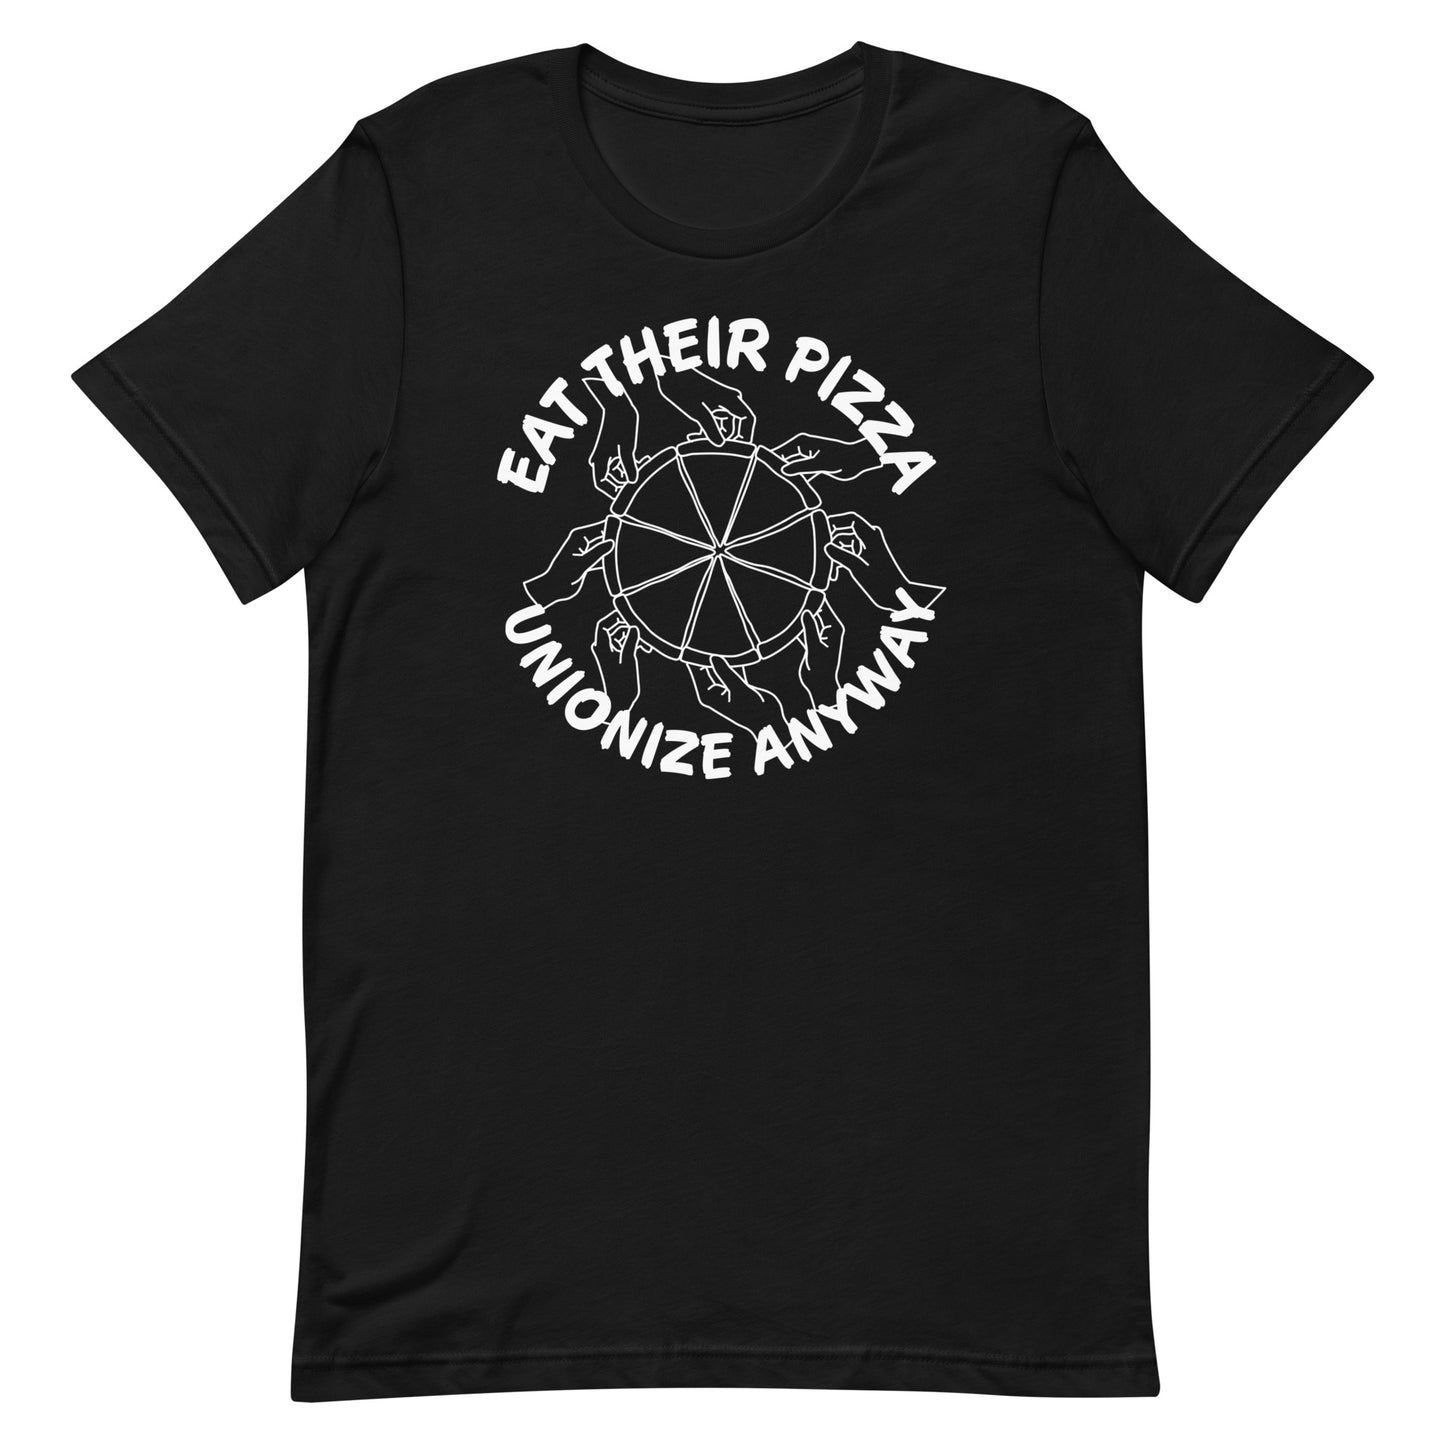 Eat Their Pizza, Unionize Anyway T-Shirt